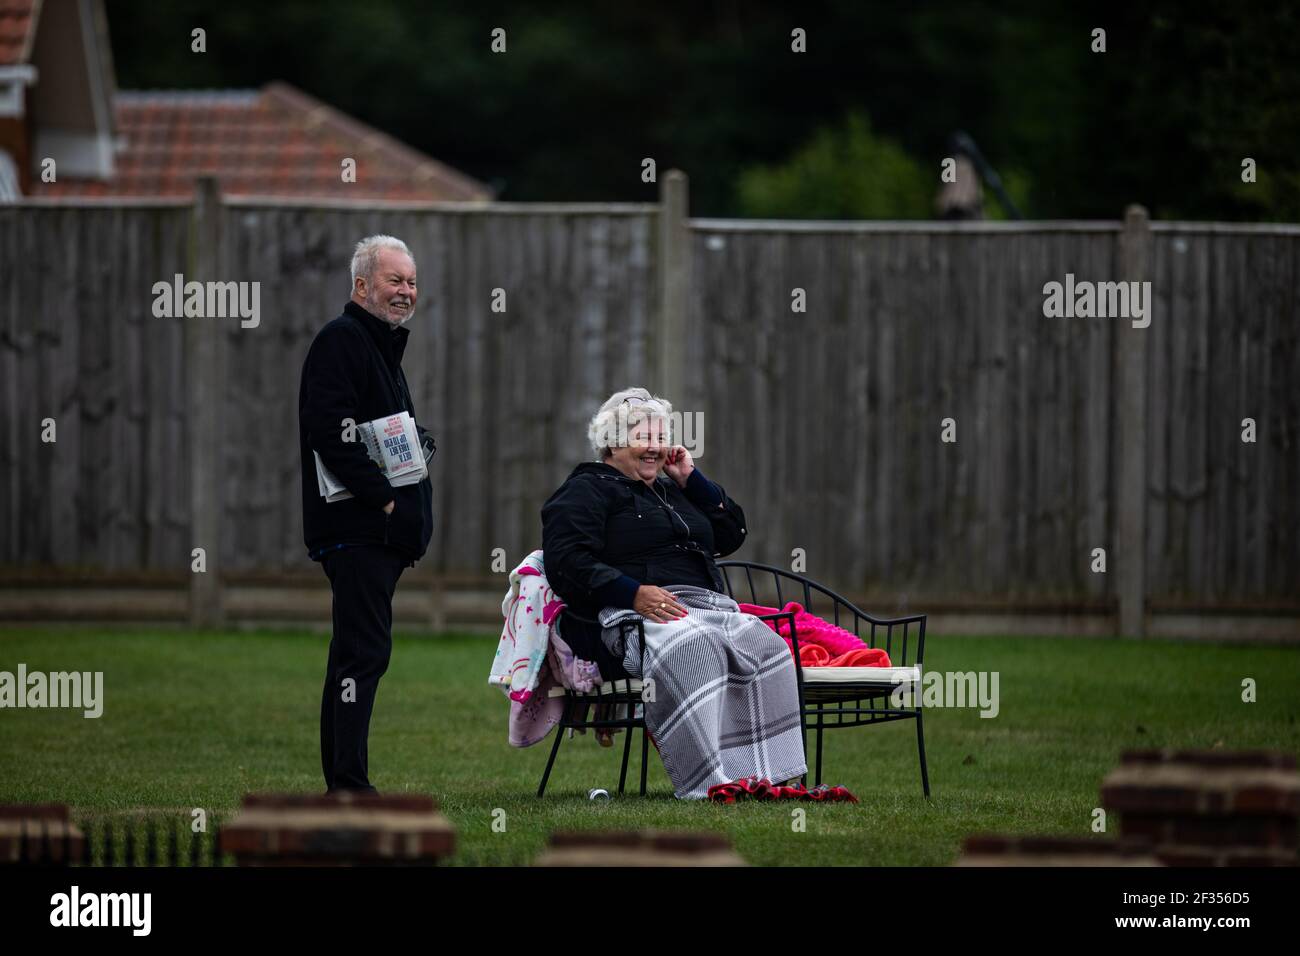 Member of public watching from there home during the Investec Handicap race at Epsom Racecourse Stock Photo